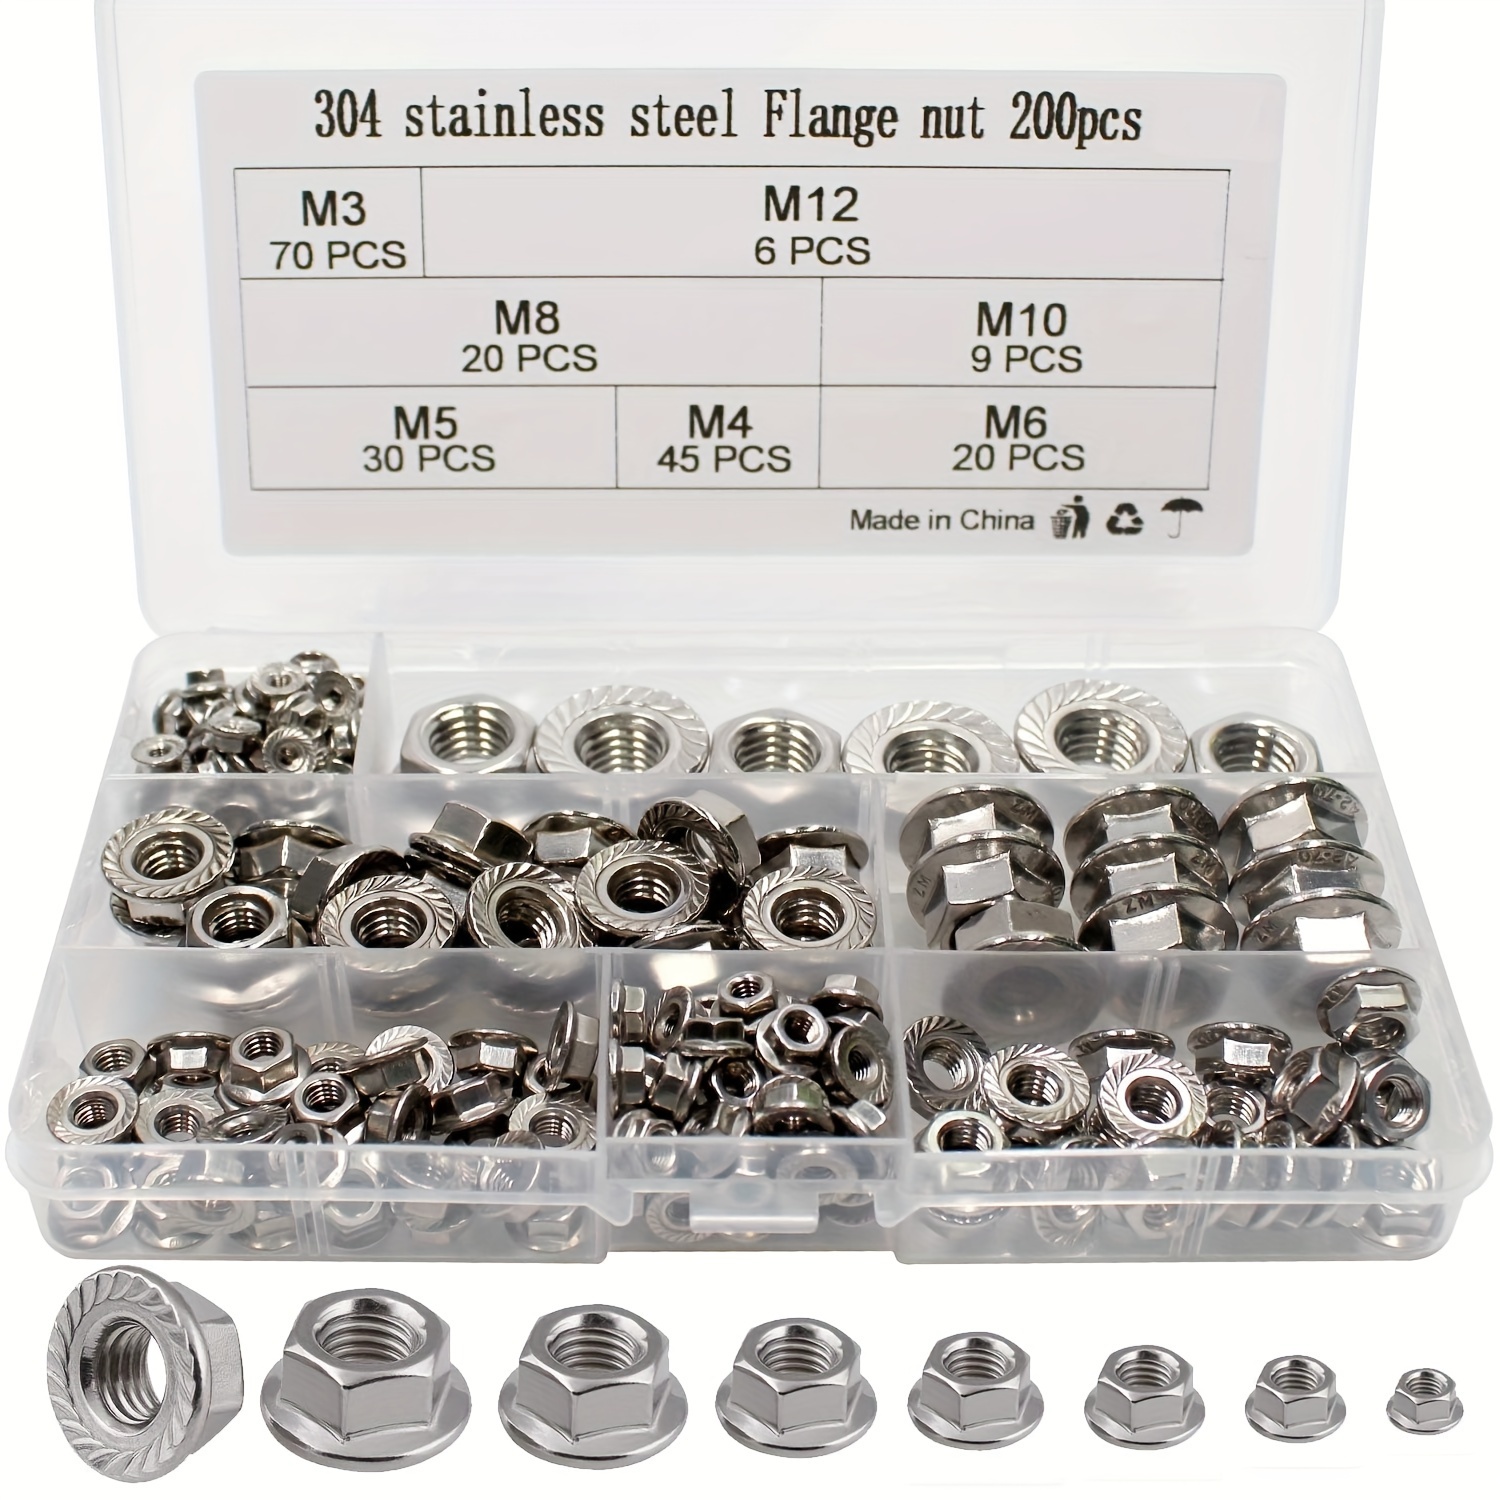 182 Pcs. Threaded Insert M3 M4 M5 M6 M8 M10 M12 Press-In Nut Internal  Thread Nuts Embedding Nuts For Plastic Parts By Heat Or Ultrasound 